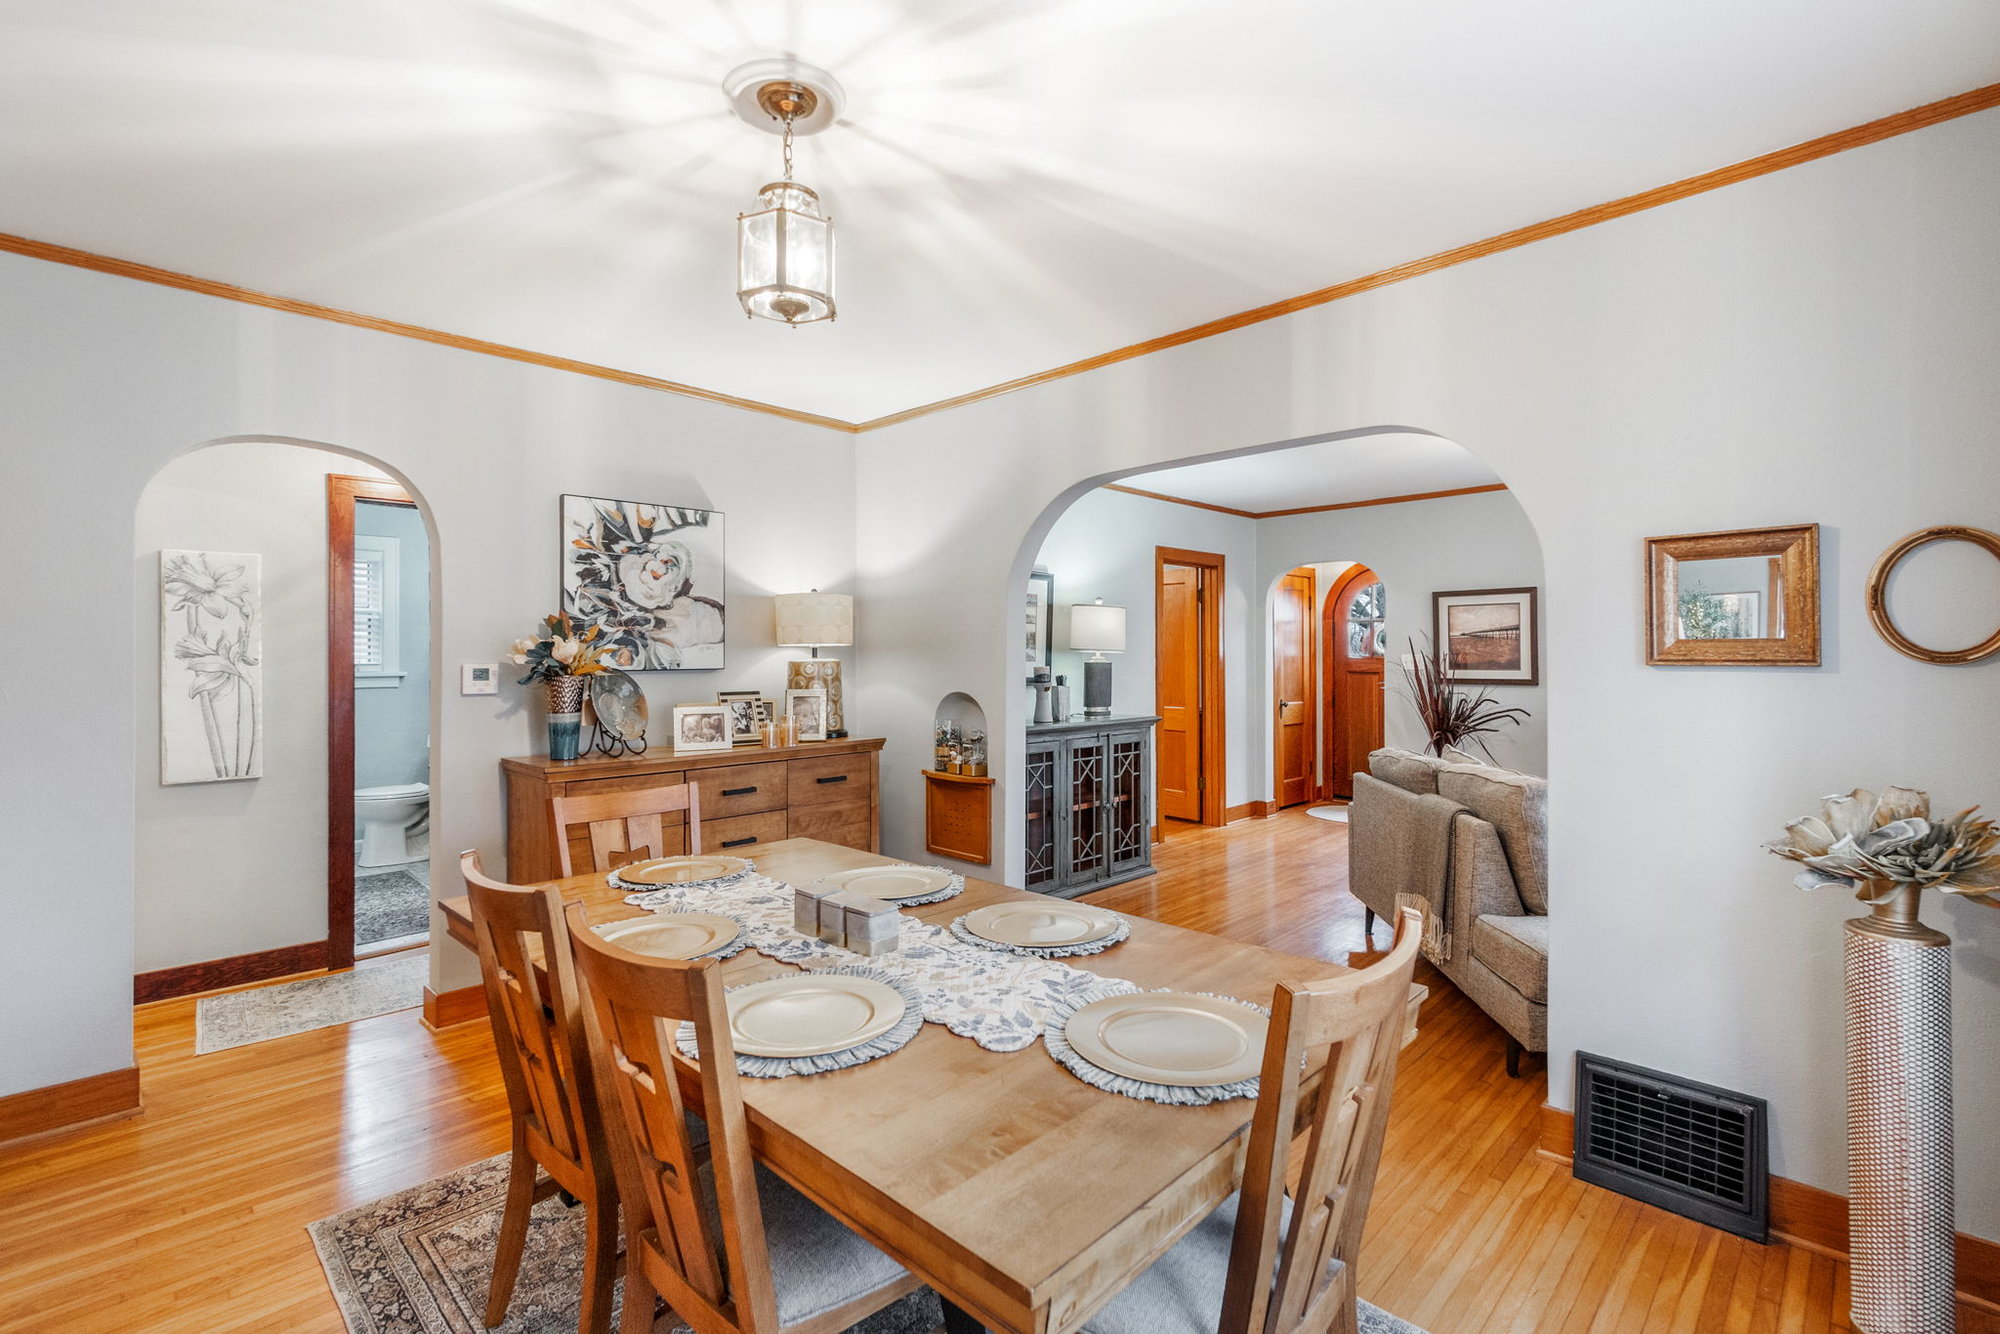 discover charm and character in this 1930's brick beauty in cedar falls iowa